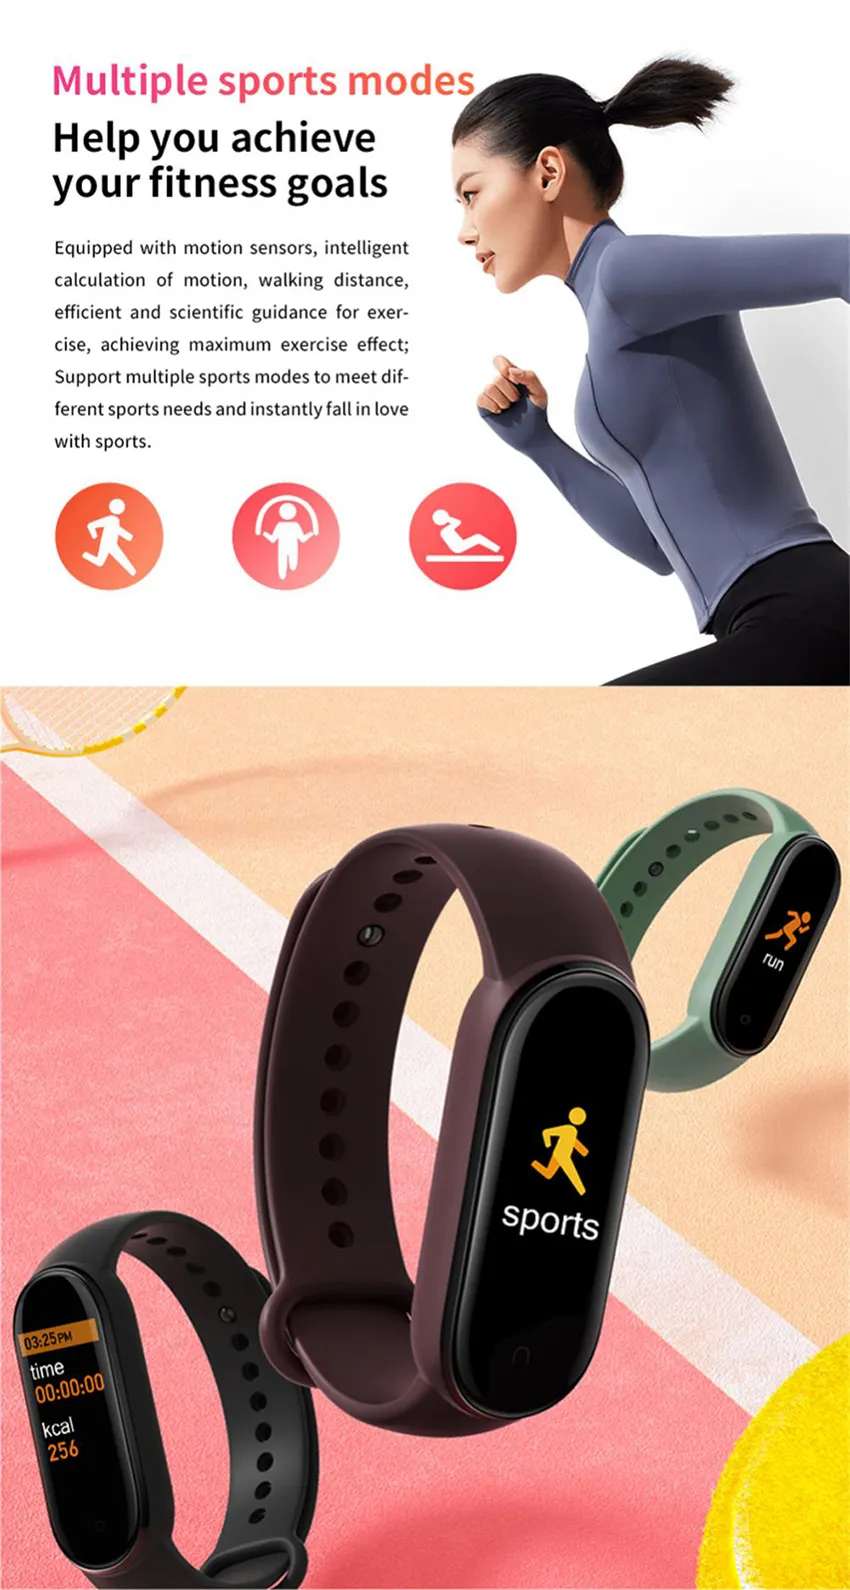 Circular Ring Slim: A Practical Way to Keep Track of Exercise and More